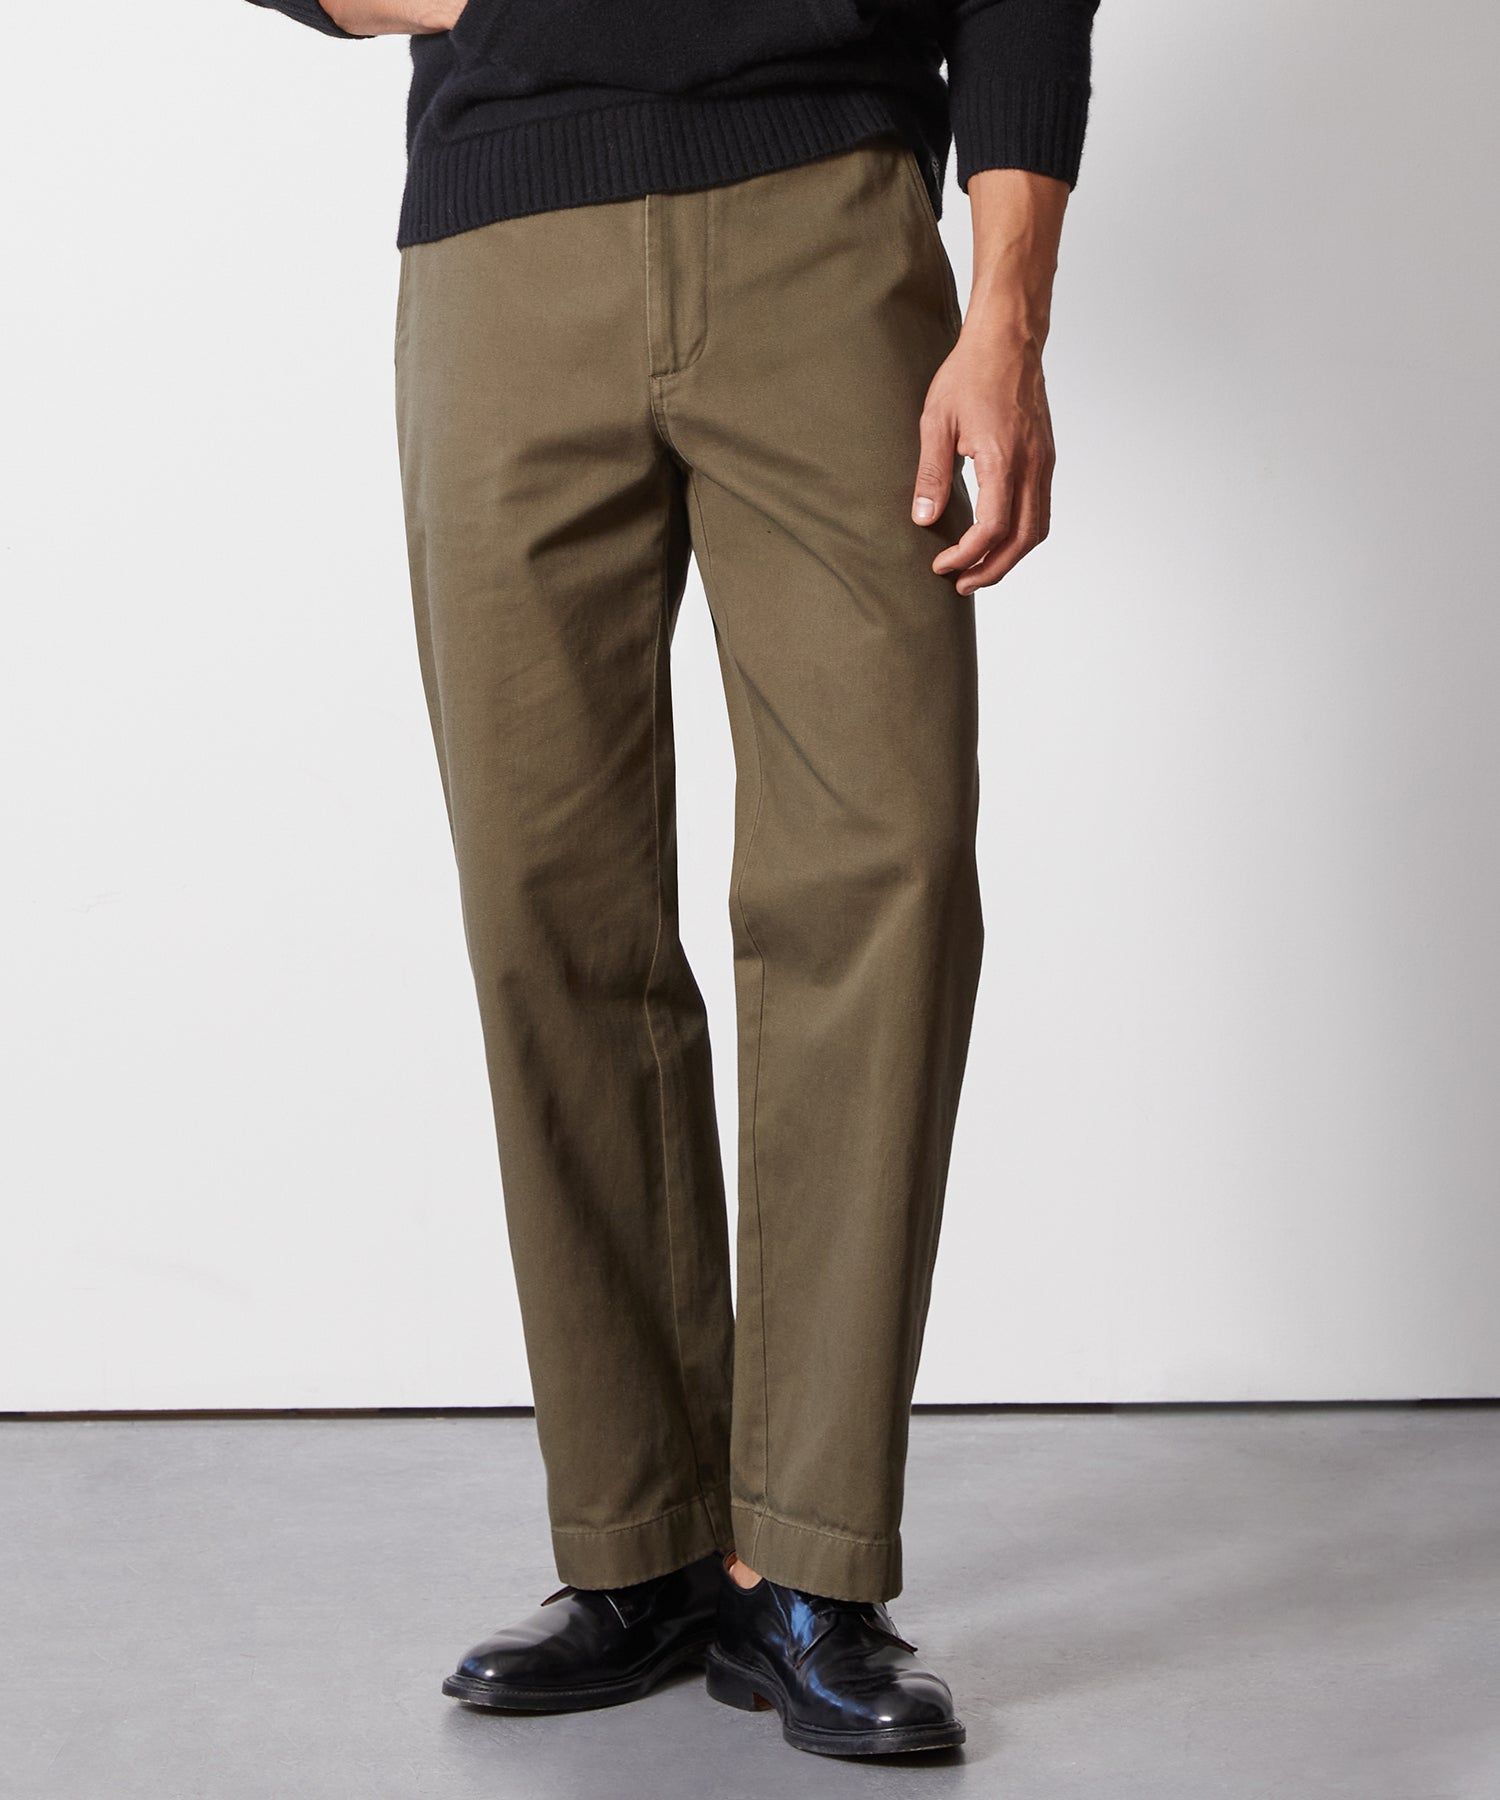 OUAT 004-GARMENT DYED WORK TROUSERS - スラックス